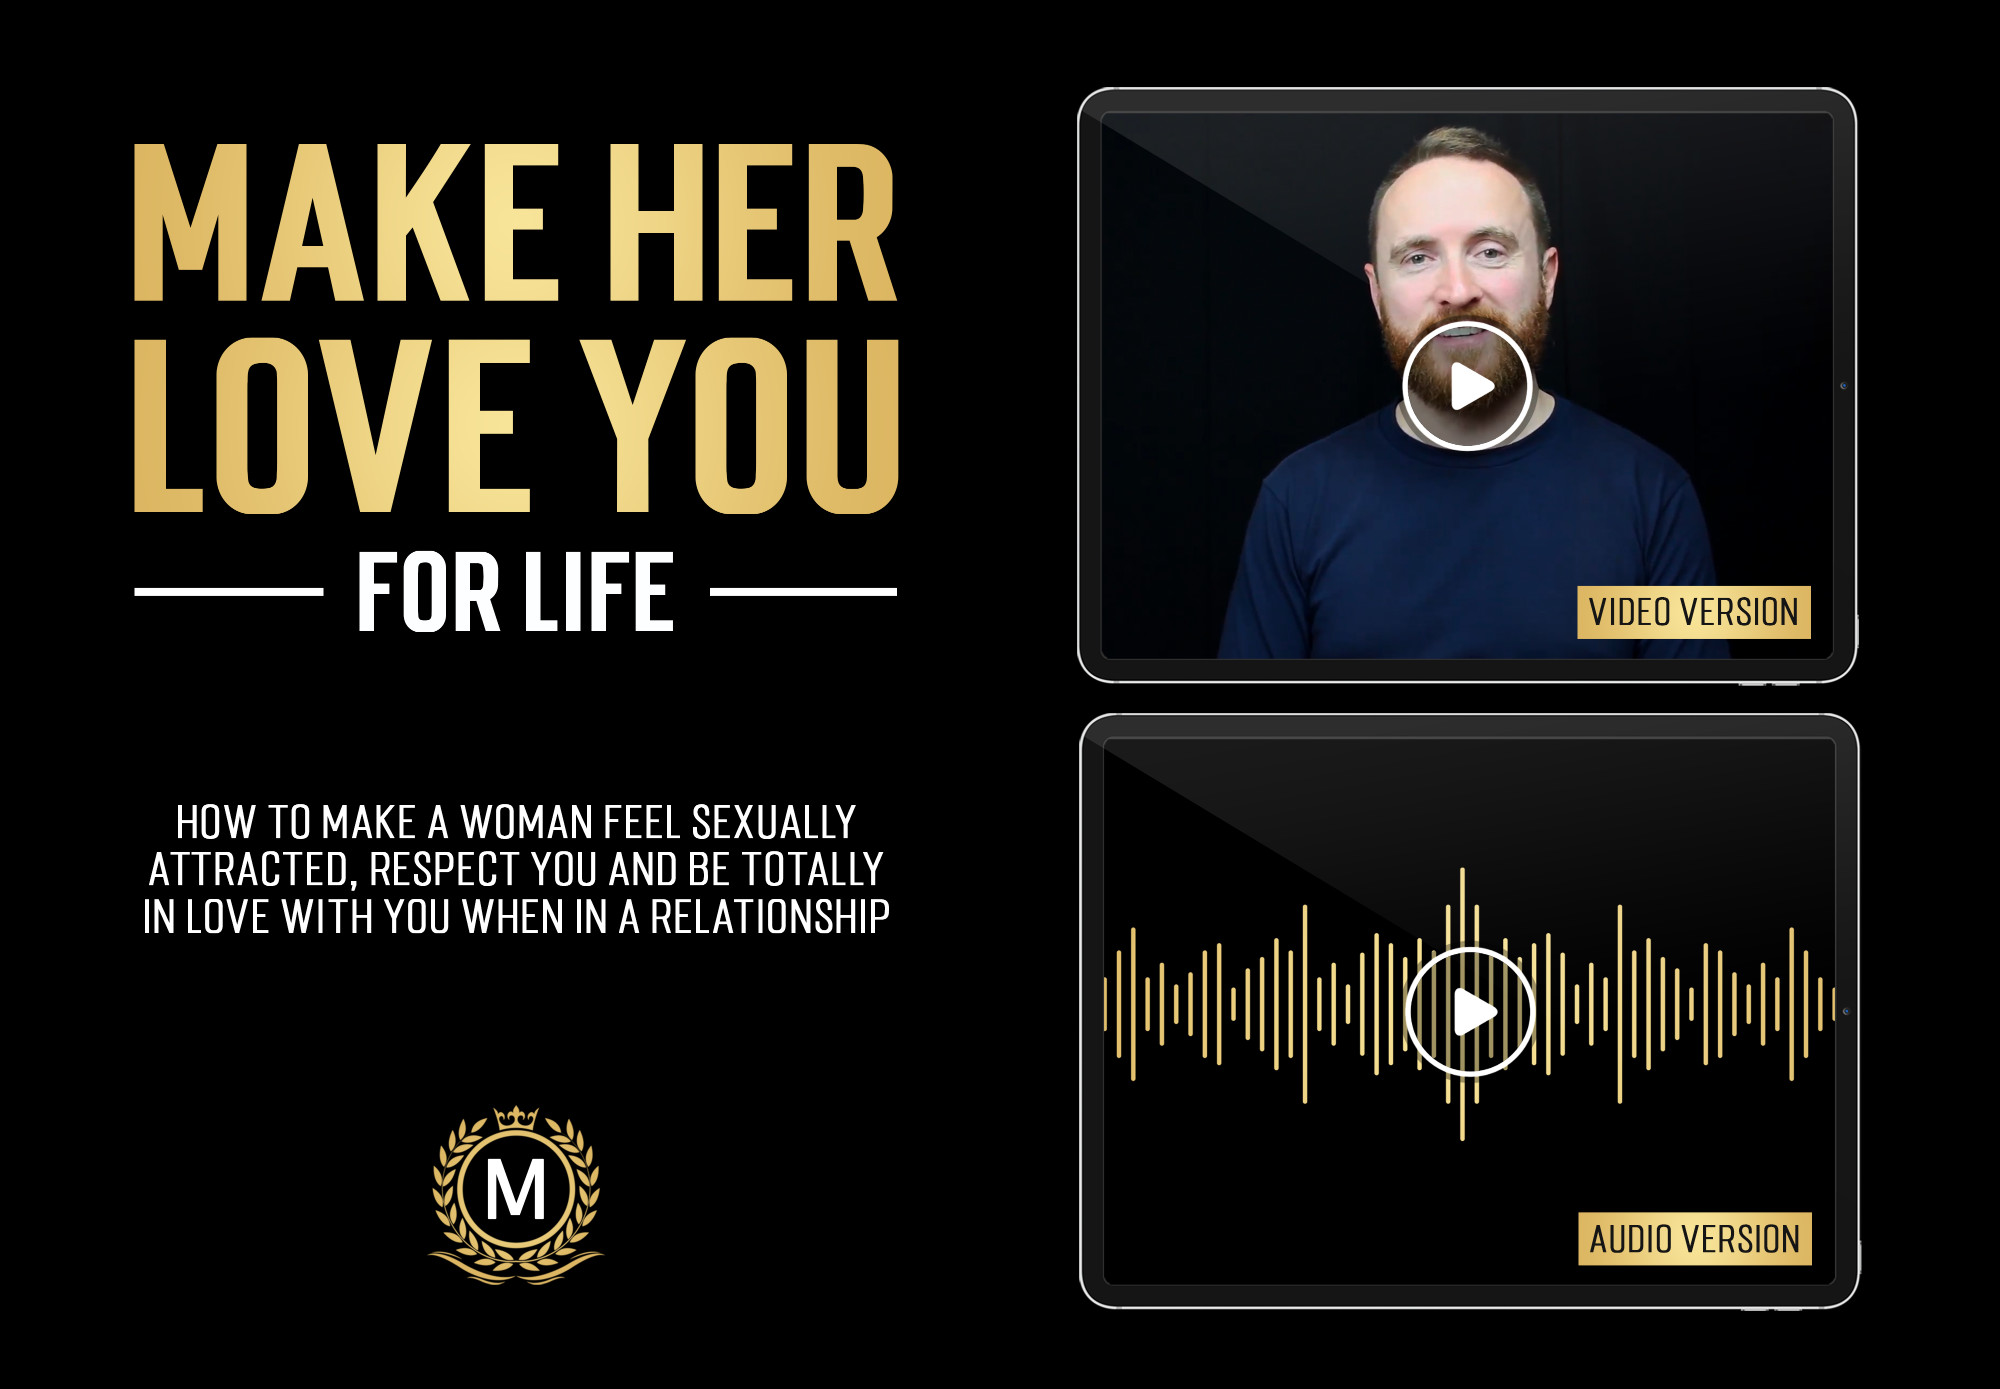 Make Her Love You For Life by Dan Bacon